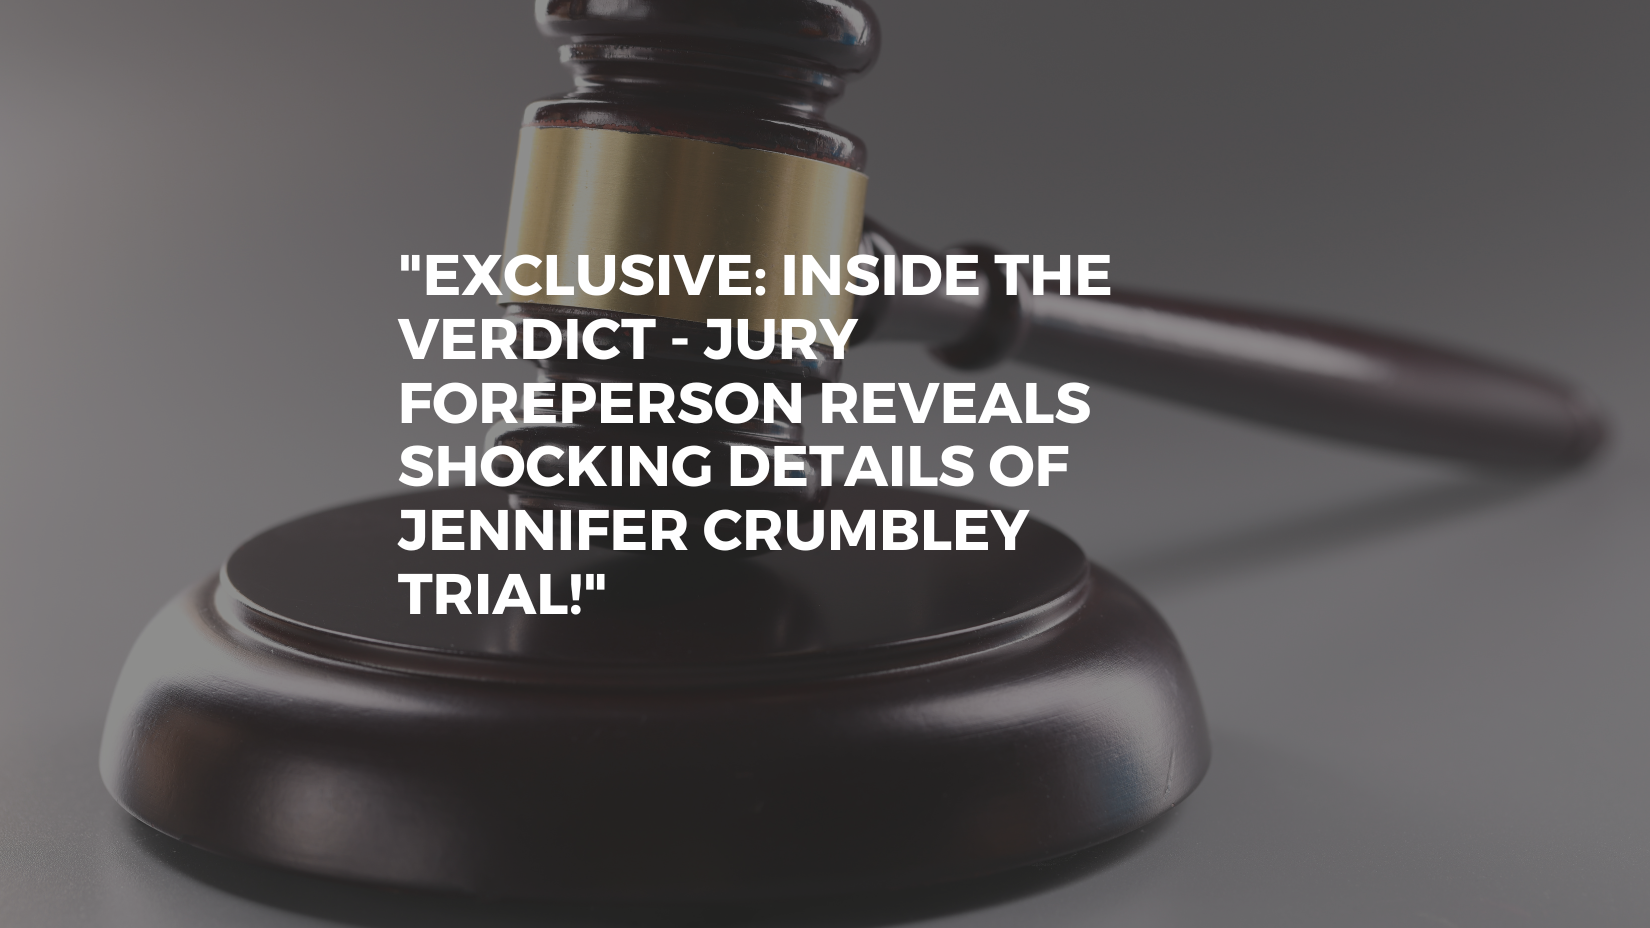 "Exclusive: Inside the Verdict - Jury Foreperson Reveals Shocking Details of Jennifer Crumbley Trial!"